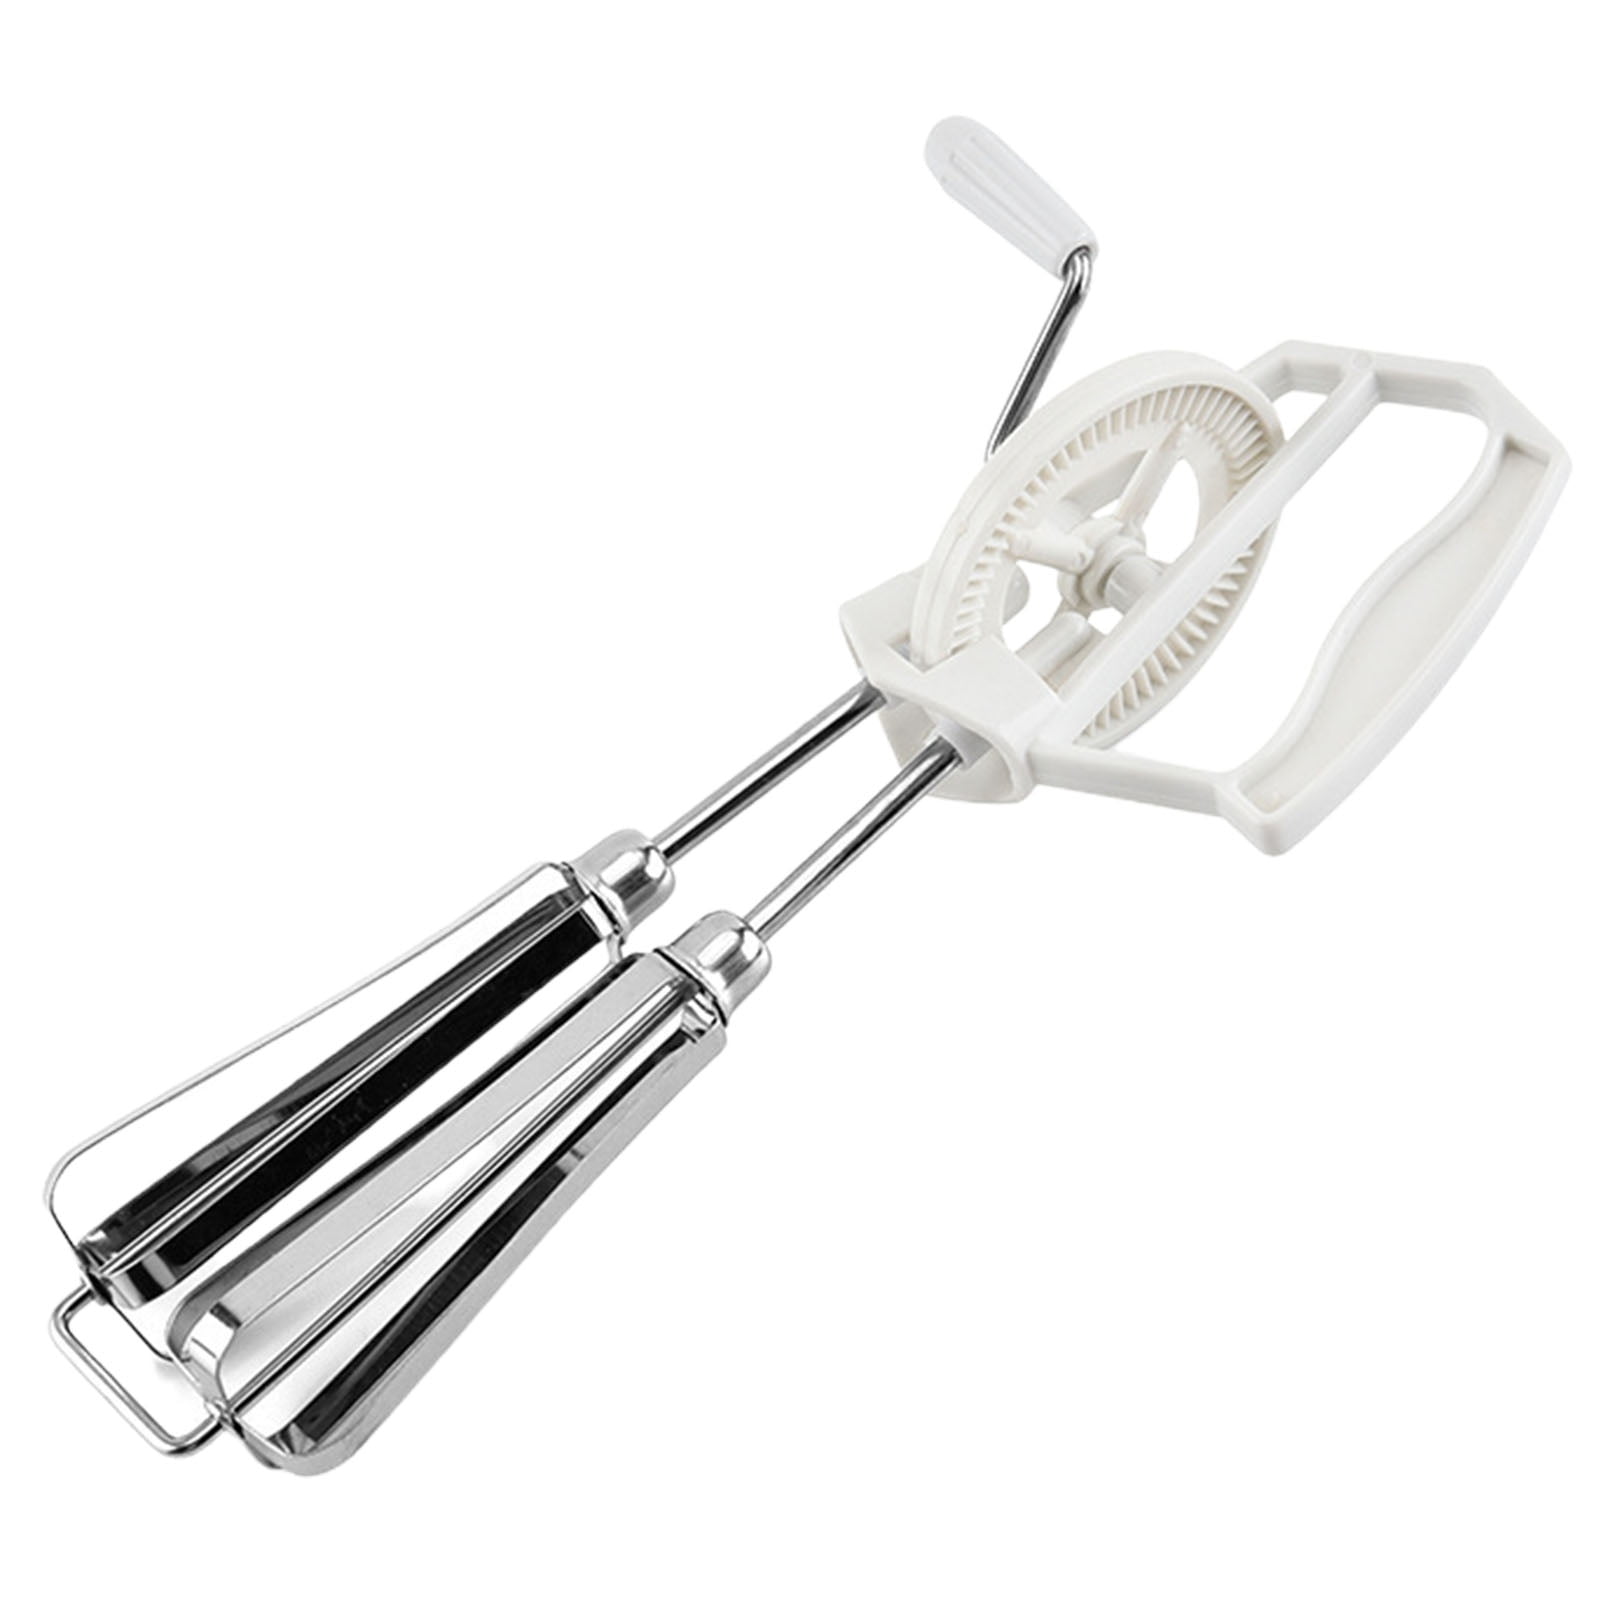 Manual Hand Egg Beater Mixer Isolated On White Background Stock